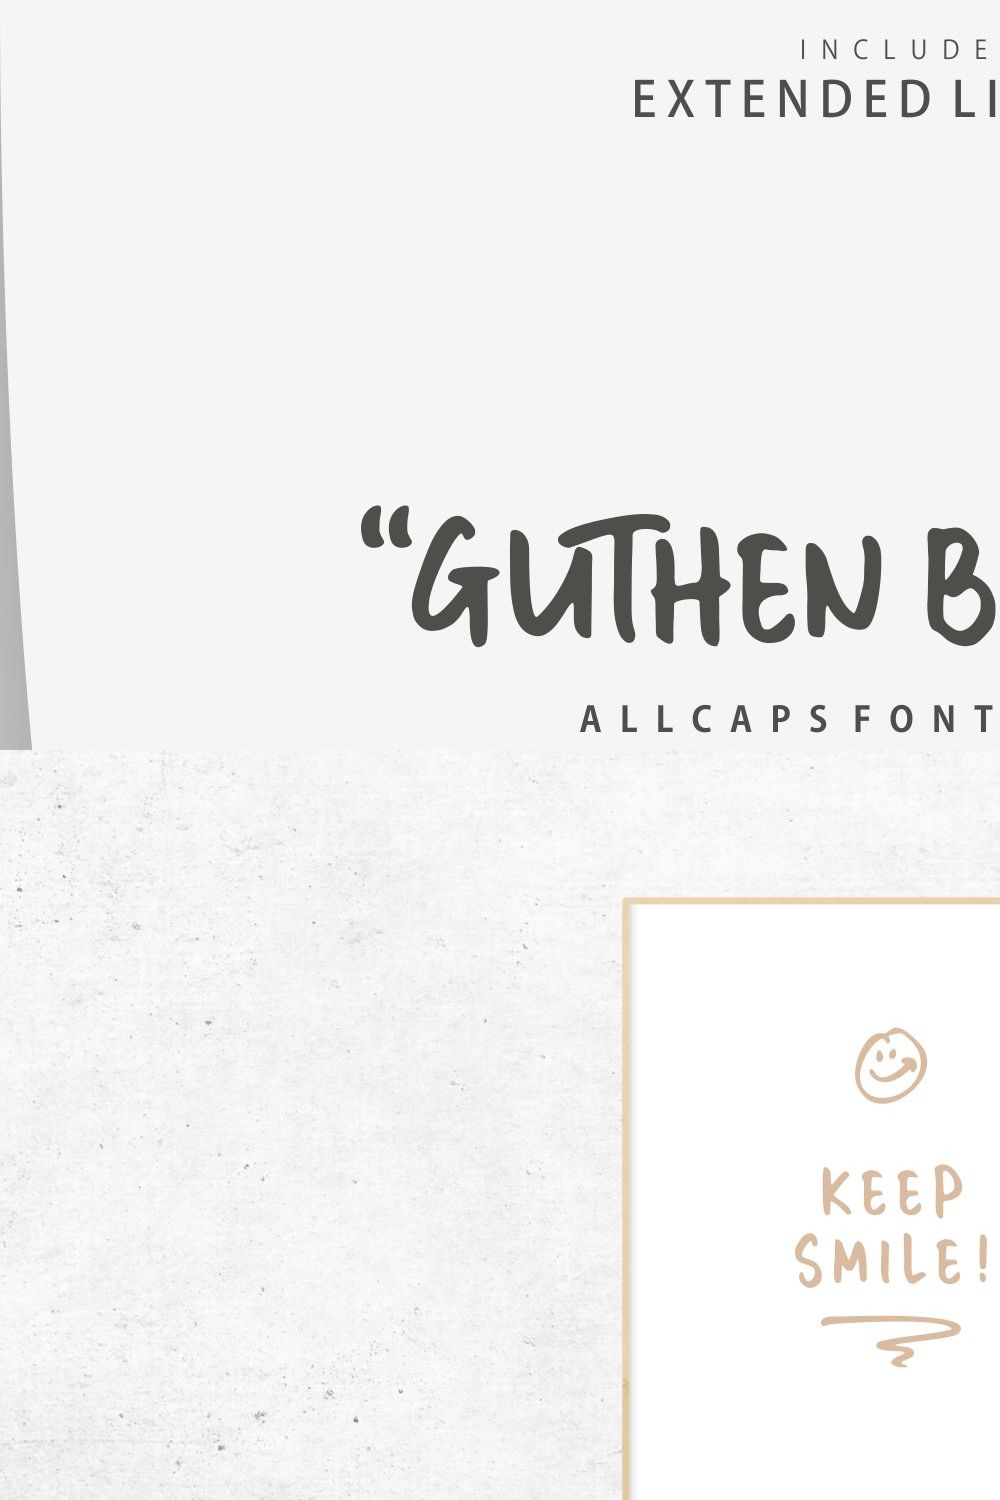 Guthen Bloots Allcaps (Extended) pinterest preview image.